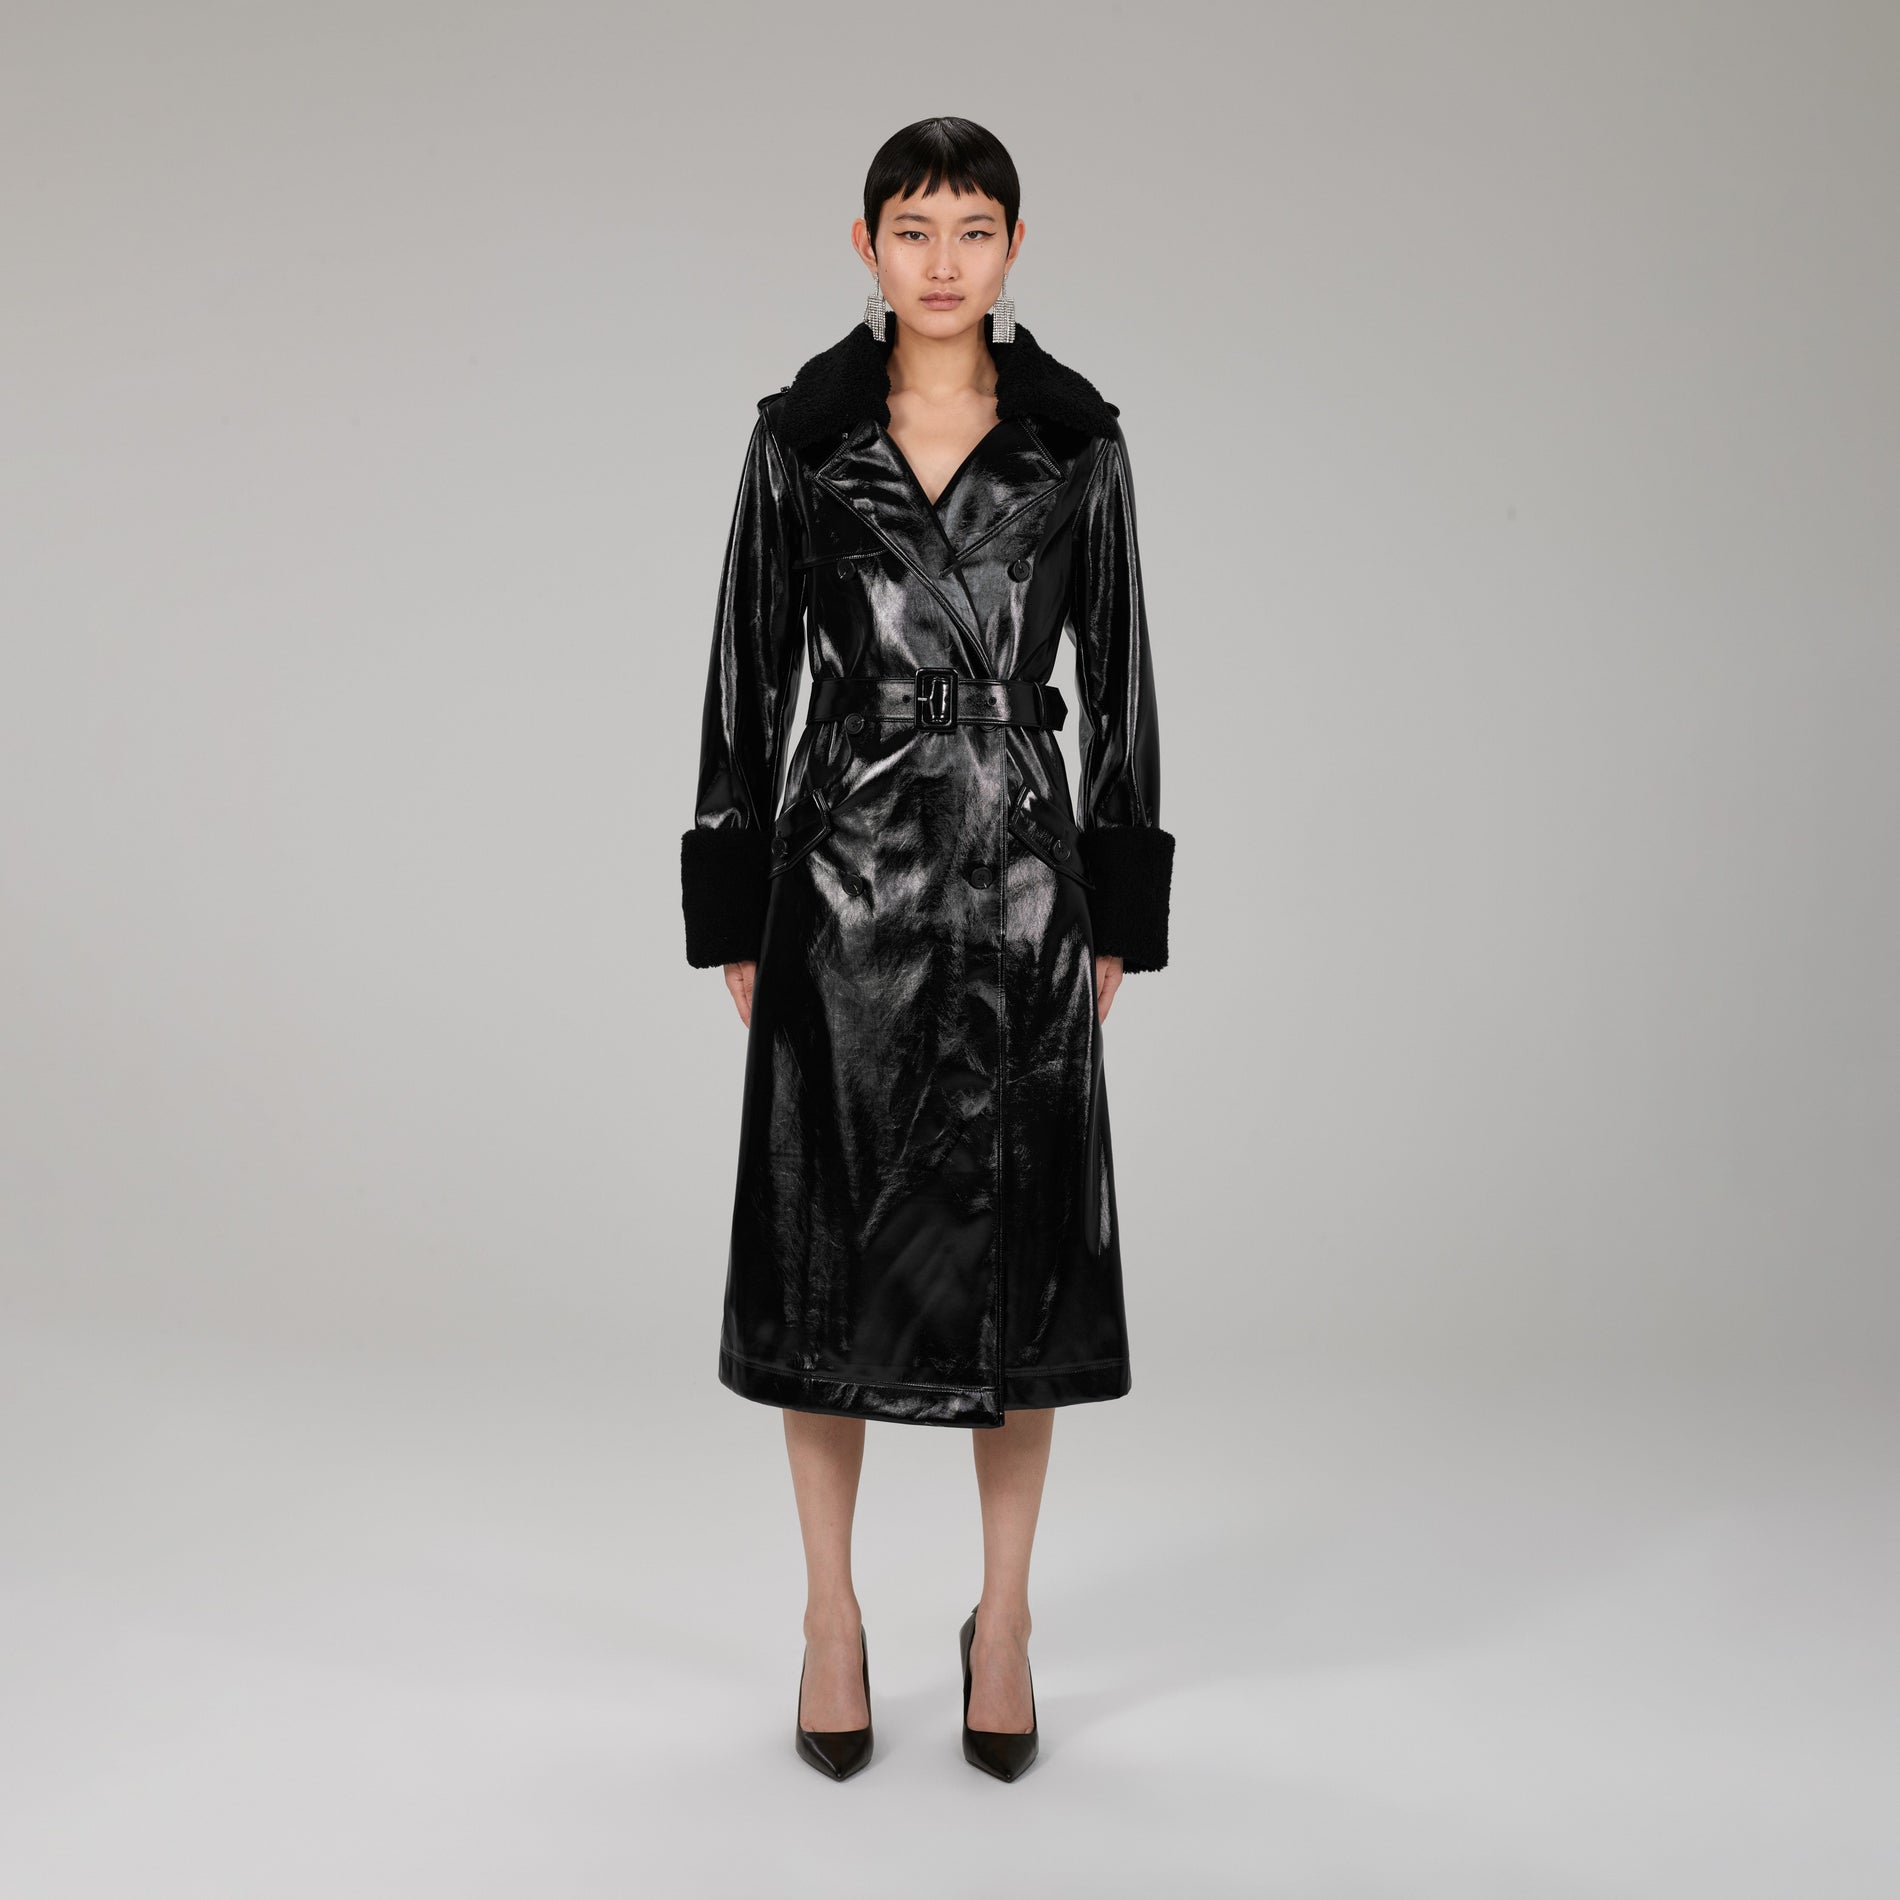 A woman wearing the Black Patent Coat